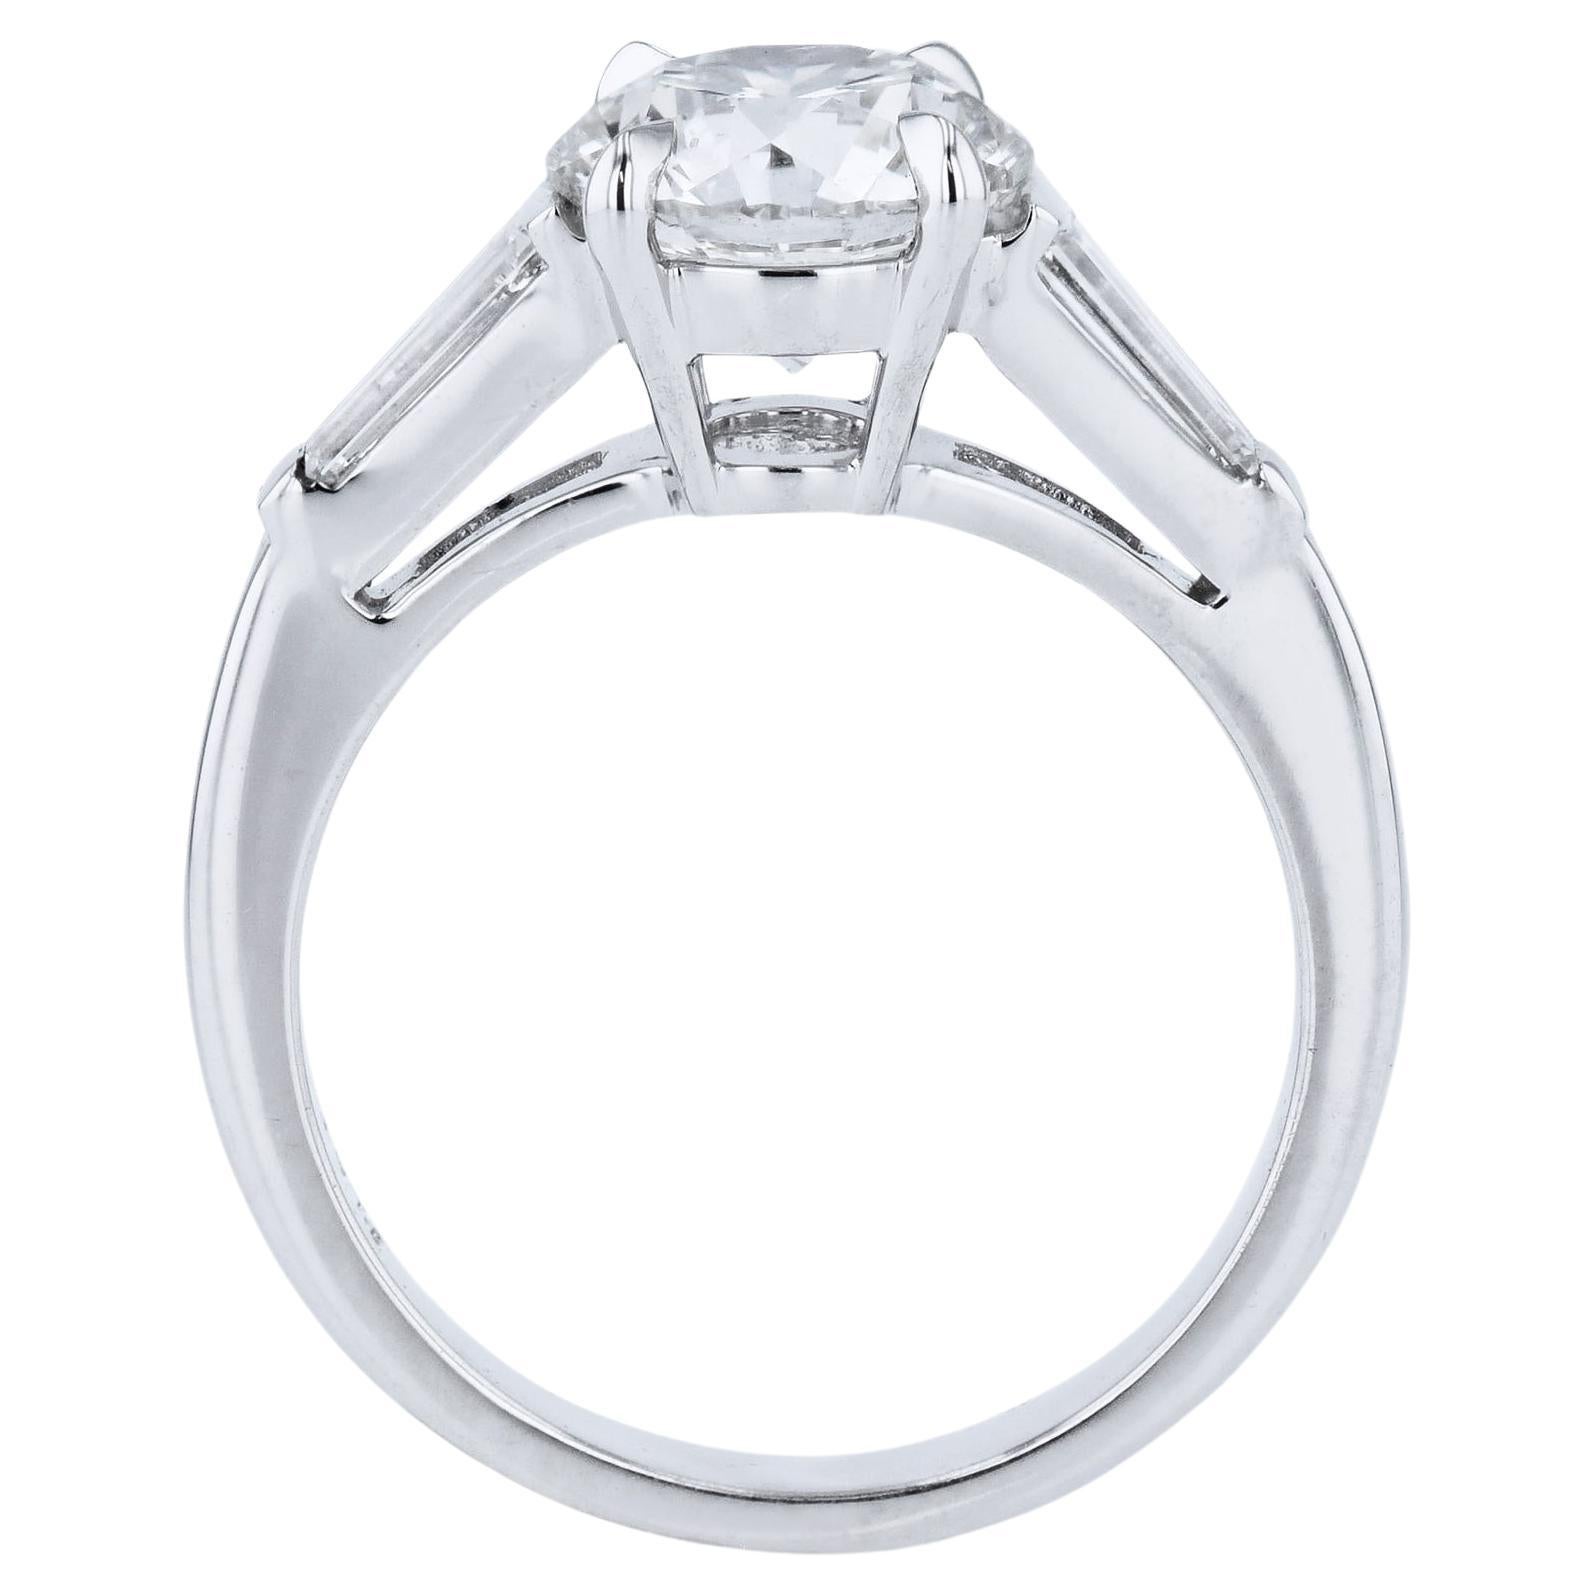 Enchanting 2.03ct Round Diamond Platinum Engagement Ring, adorned by two Baguette Diamonds. Lovingly handcrafted for the H&H Collection, this spectacular ring is sized 5.50.

Round Diamond Platinum Engagement Ring.

Platinum.

Center Diamond: 2.03ct